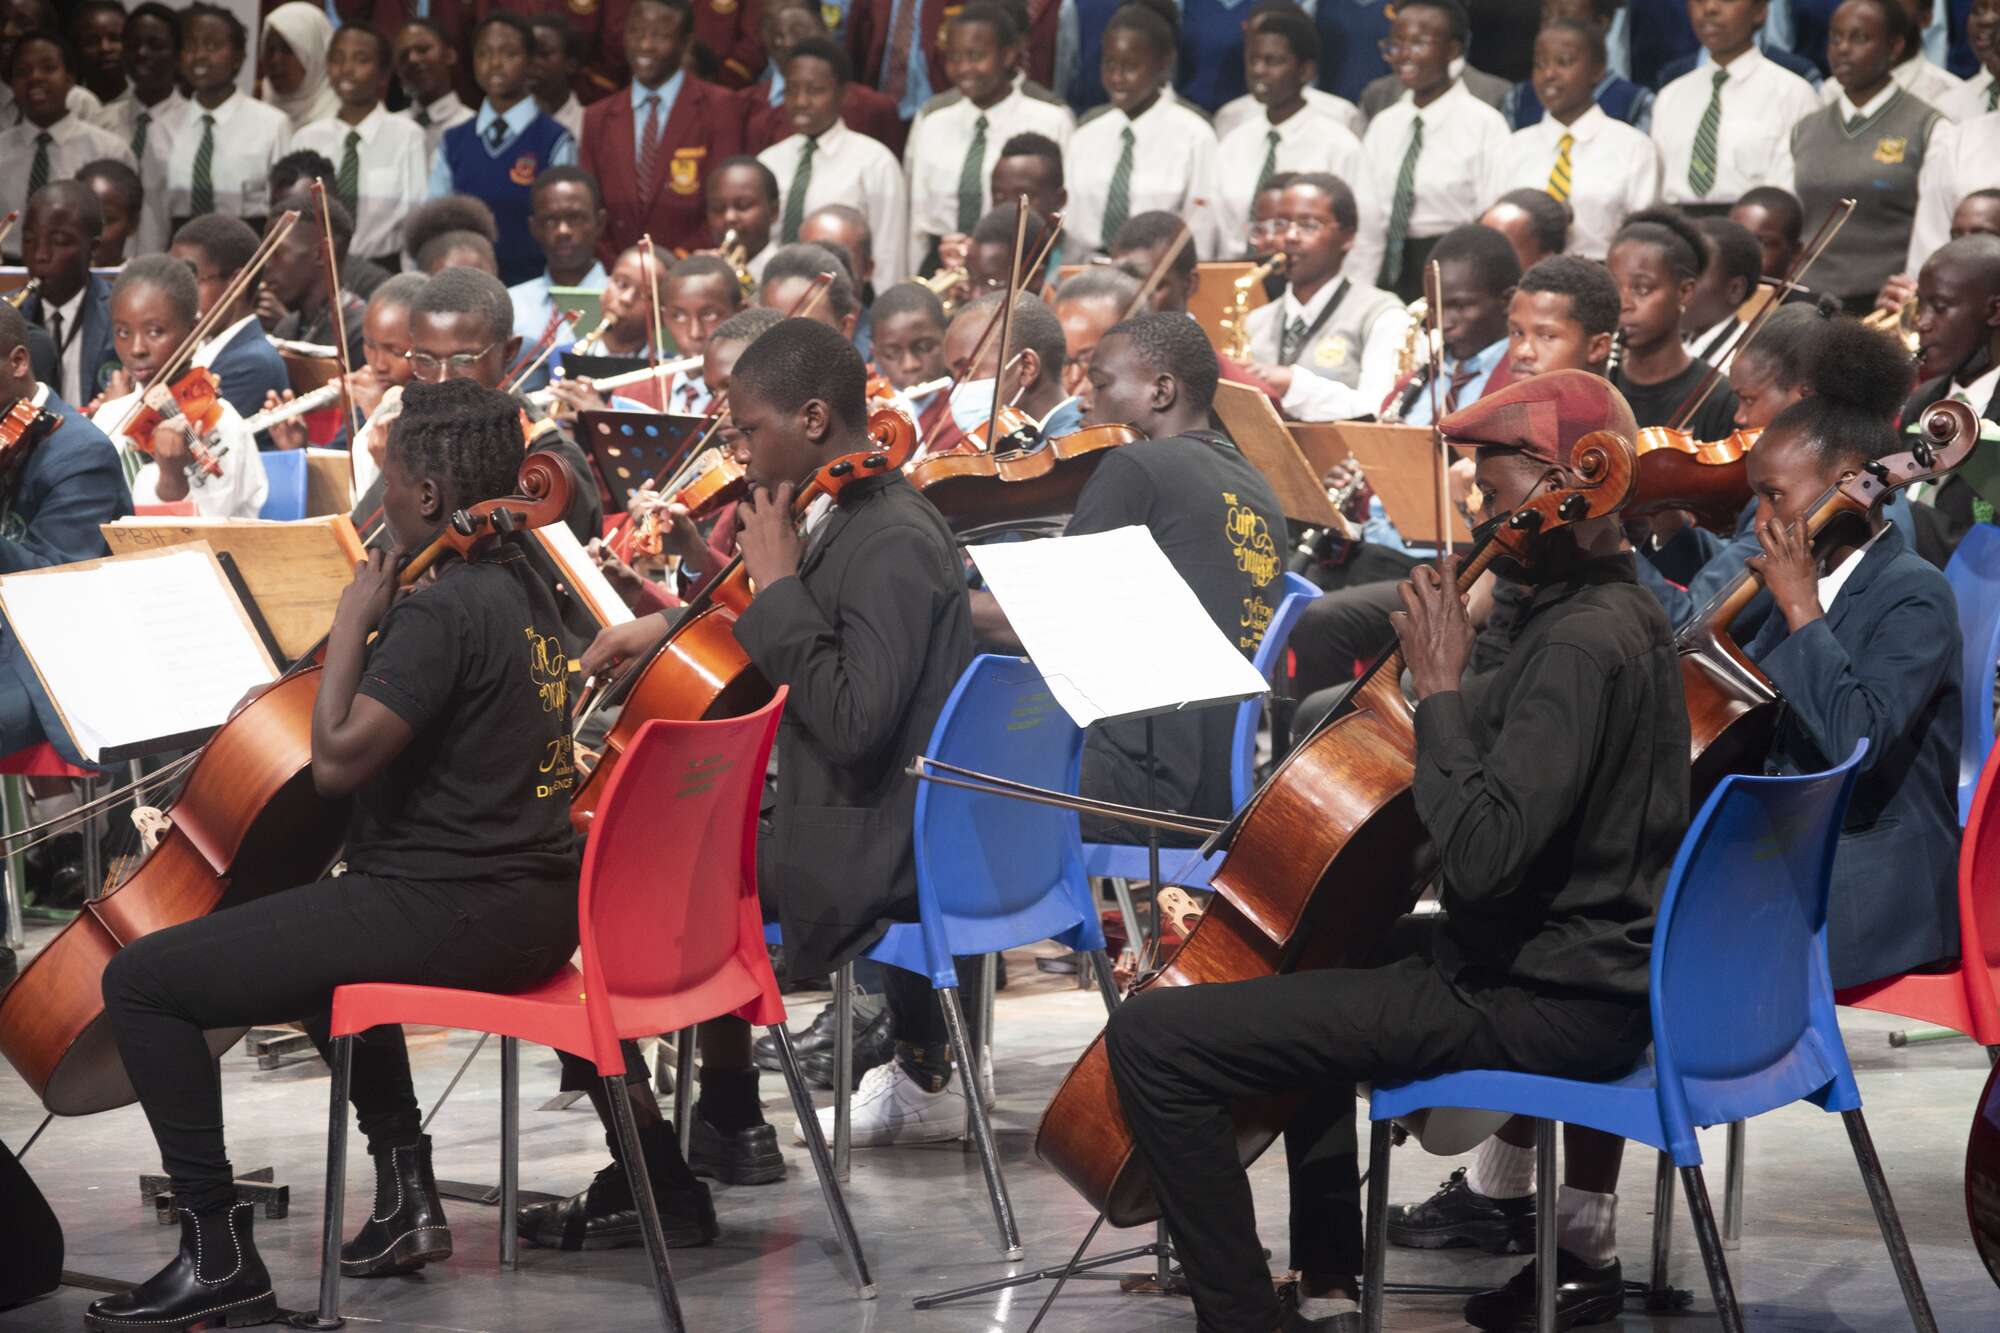 Young instrumentalists thrill at city orchestra concert